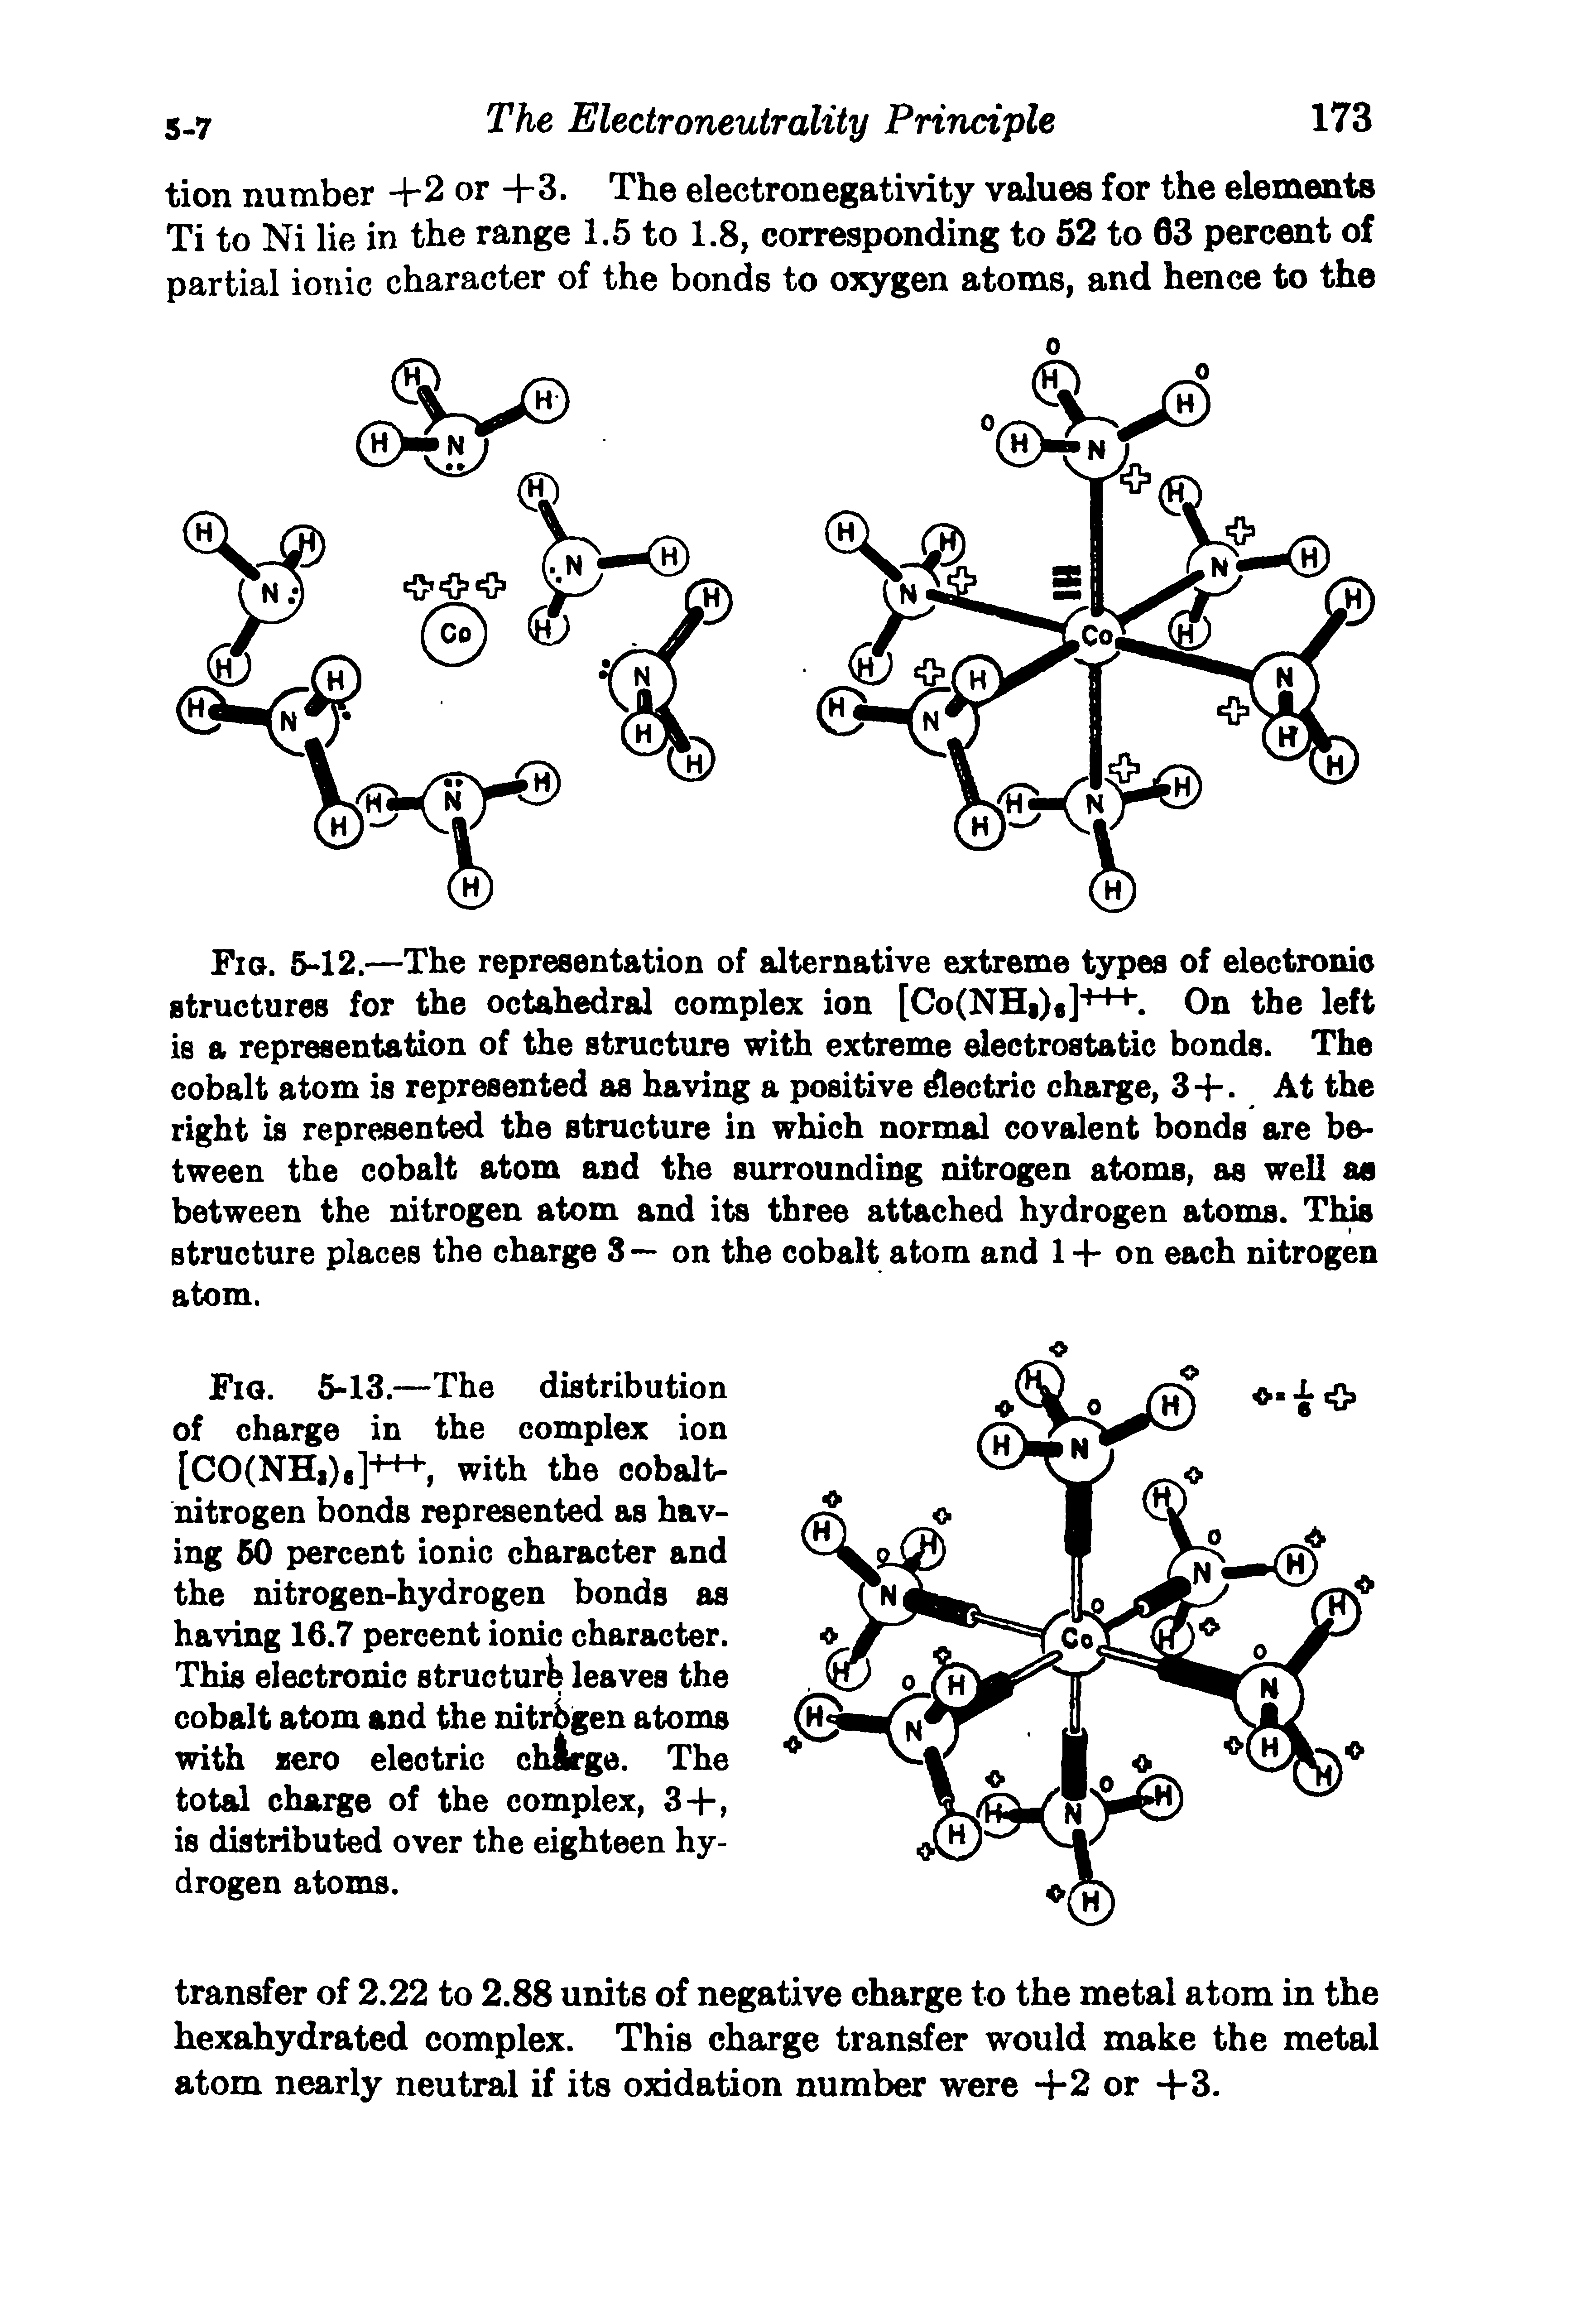 Fig. 5-12.—The representation of alternative extreme types of electronio structures for the octahedral complex ion [Co(NH ) ]++4 On the left is a representation of the structure with extreme electrostatic bonds. The cobalt atom is represented as having a positive Electric charge, 3+. At the right is represented the structure in which normal covalent bonds are between the cobalt atom and the surrounding nitrogen atoms, as well as between the nitrogen atom and its three attached hydrogen atoms. This structure places the charge 3— on the cobalt atom and 1+ on each nitrogen atom.